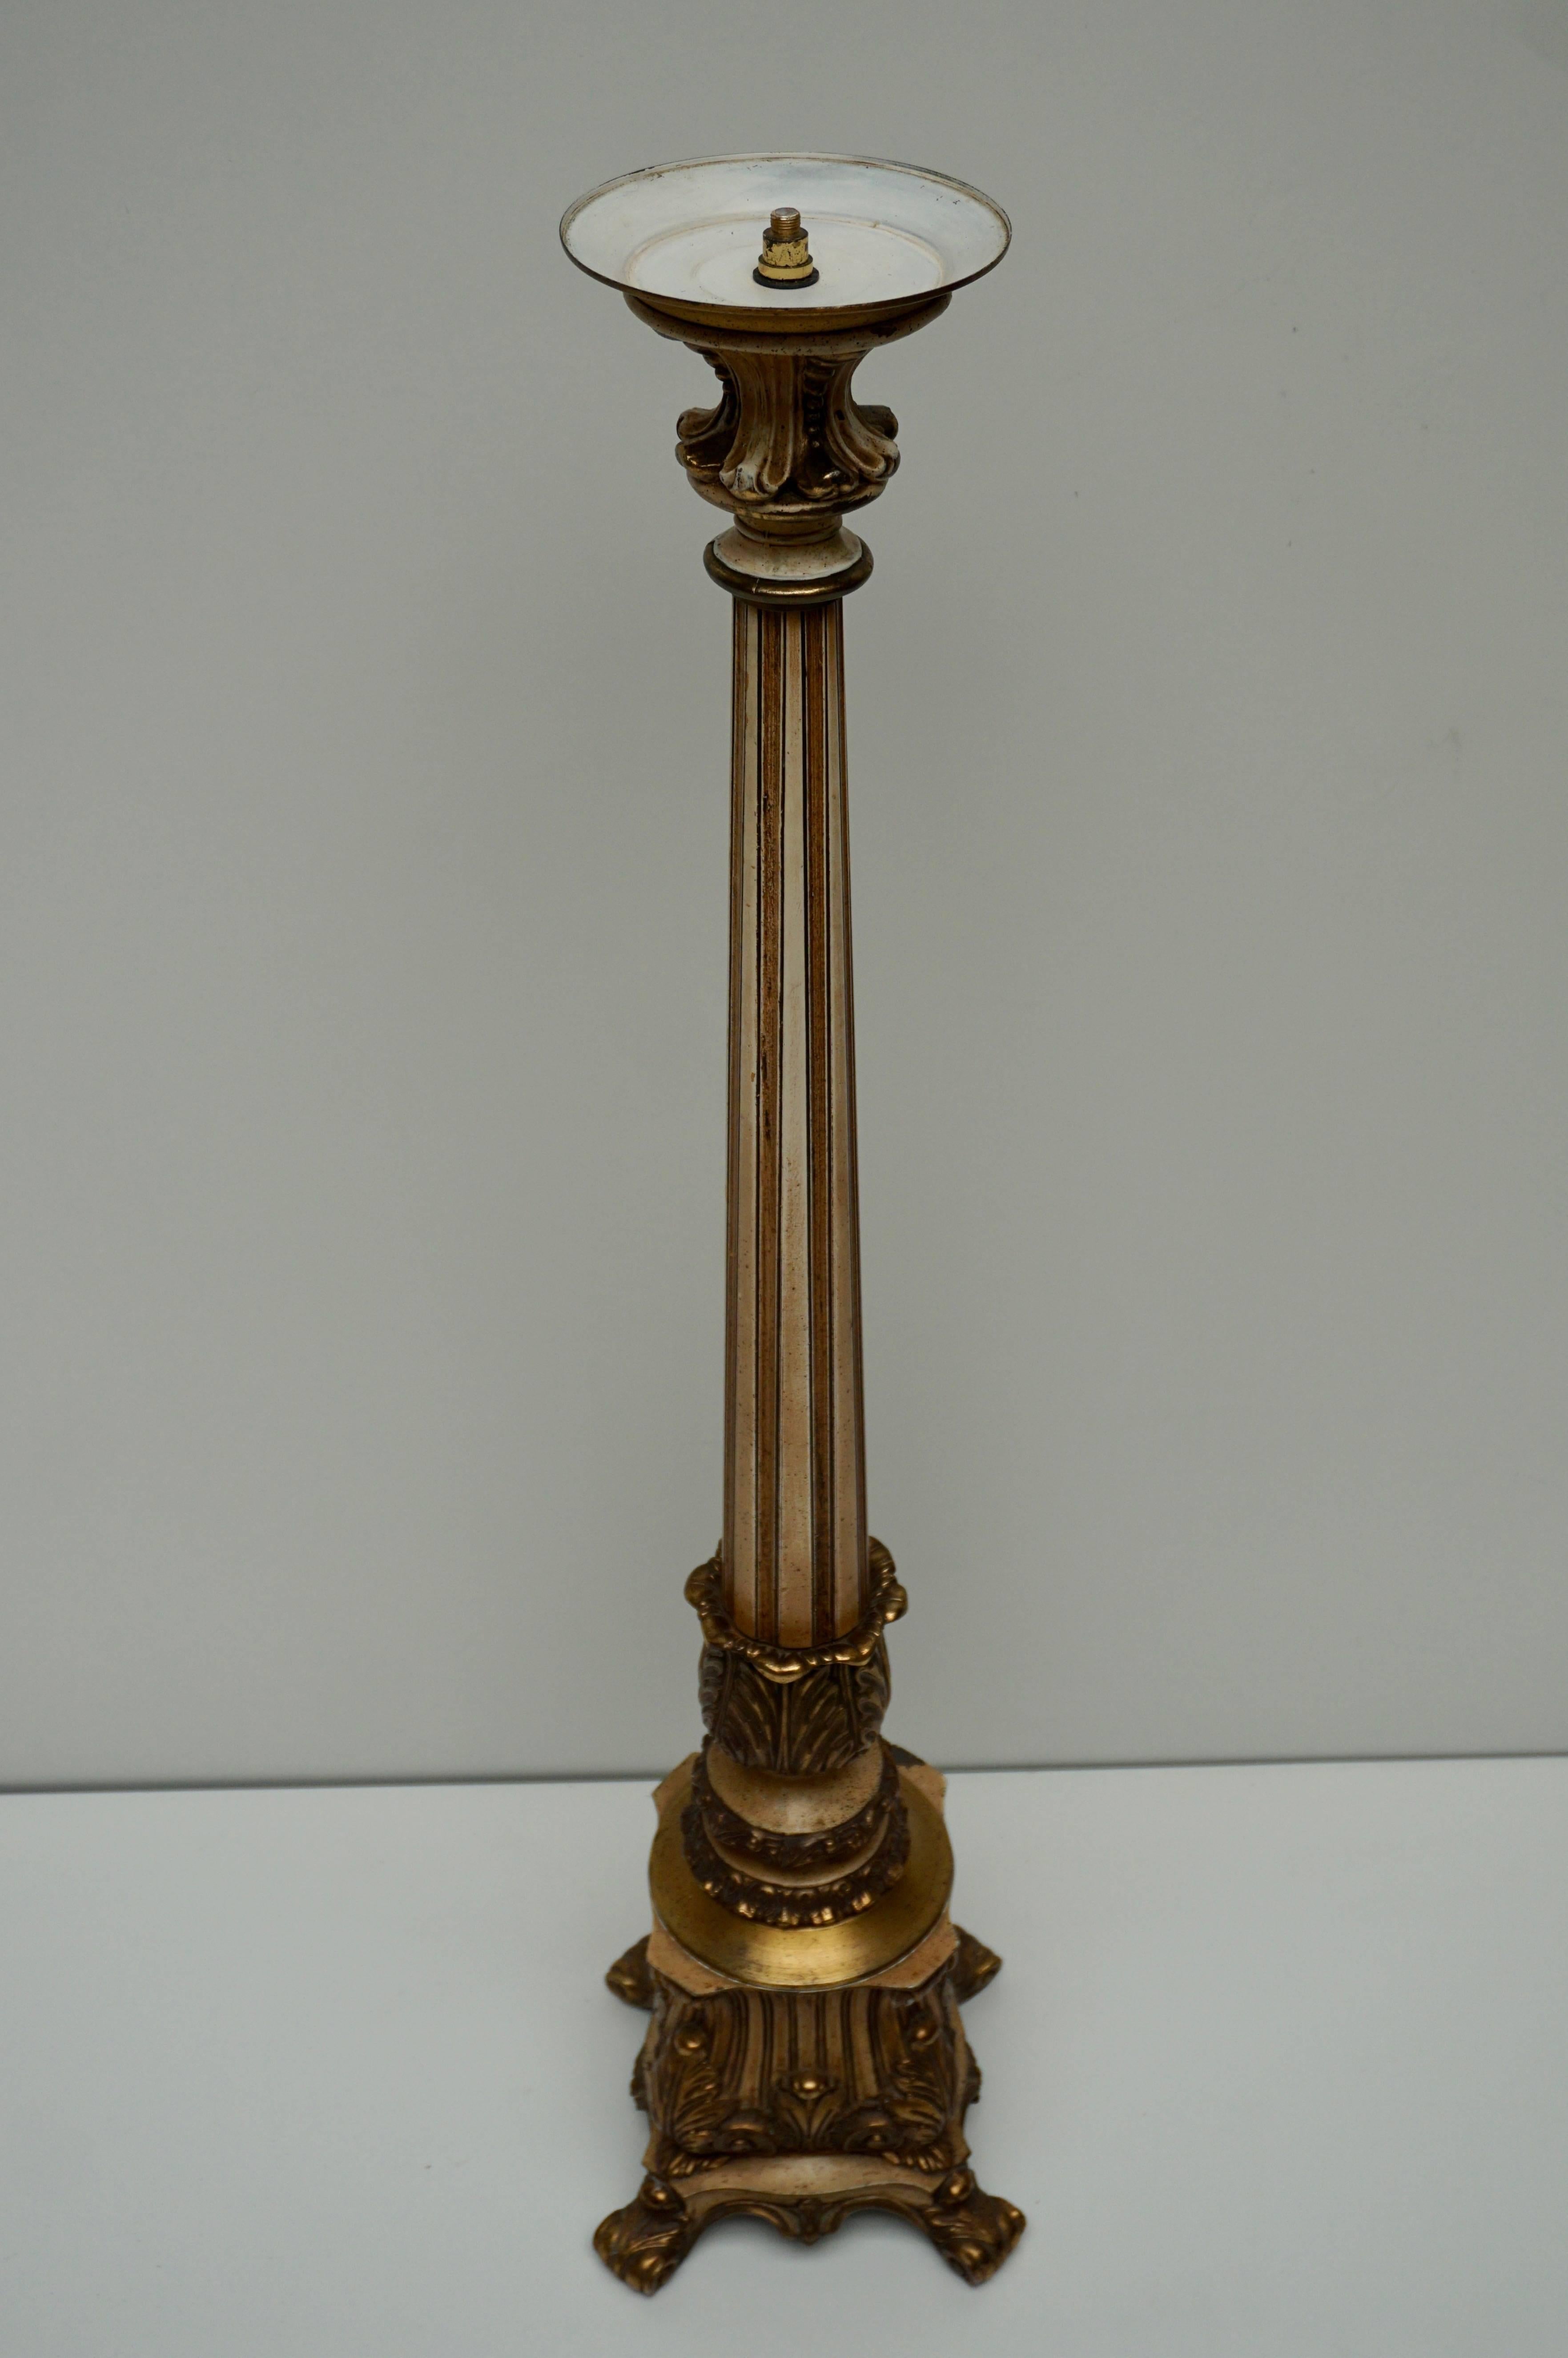 Brass and metal floor candelabra with ornaments.

